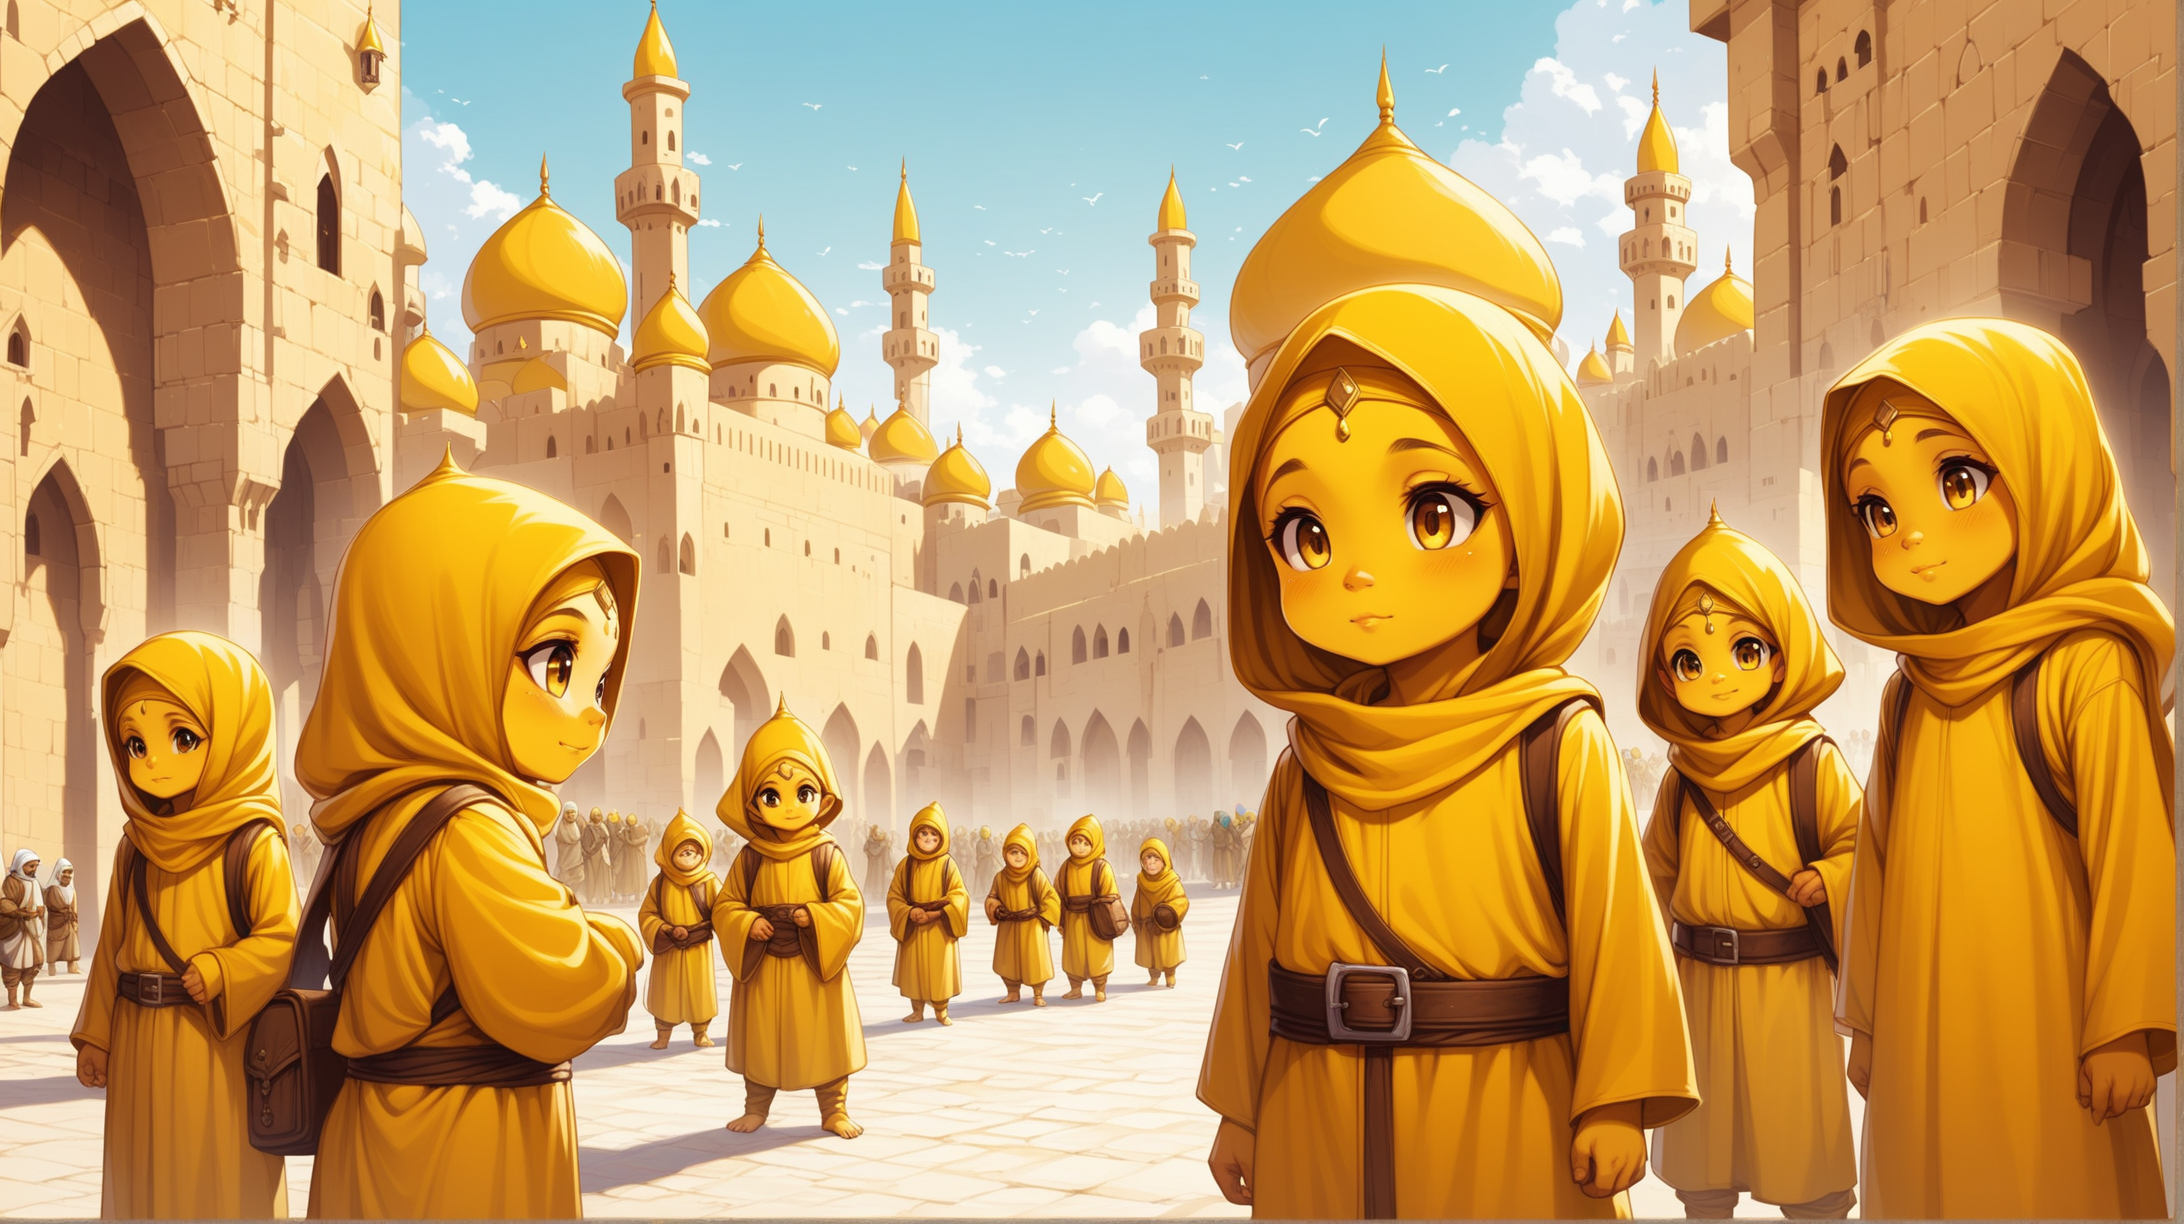 young yellow gnome boys and girls with yellow skin, Arabic city, Medieval fantasy